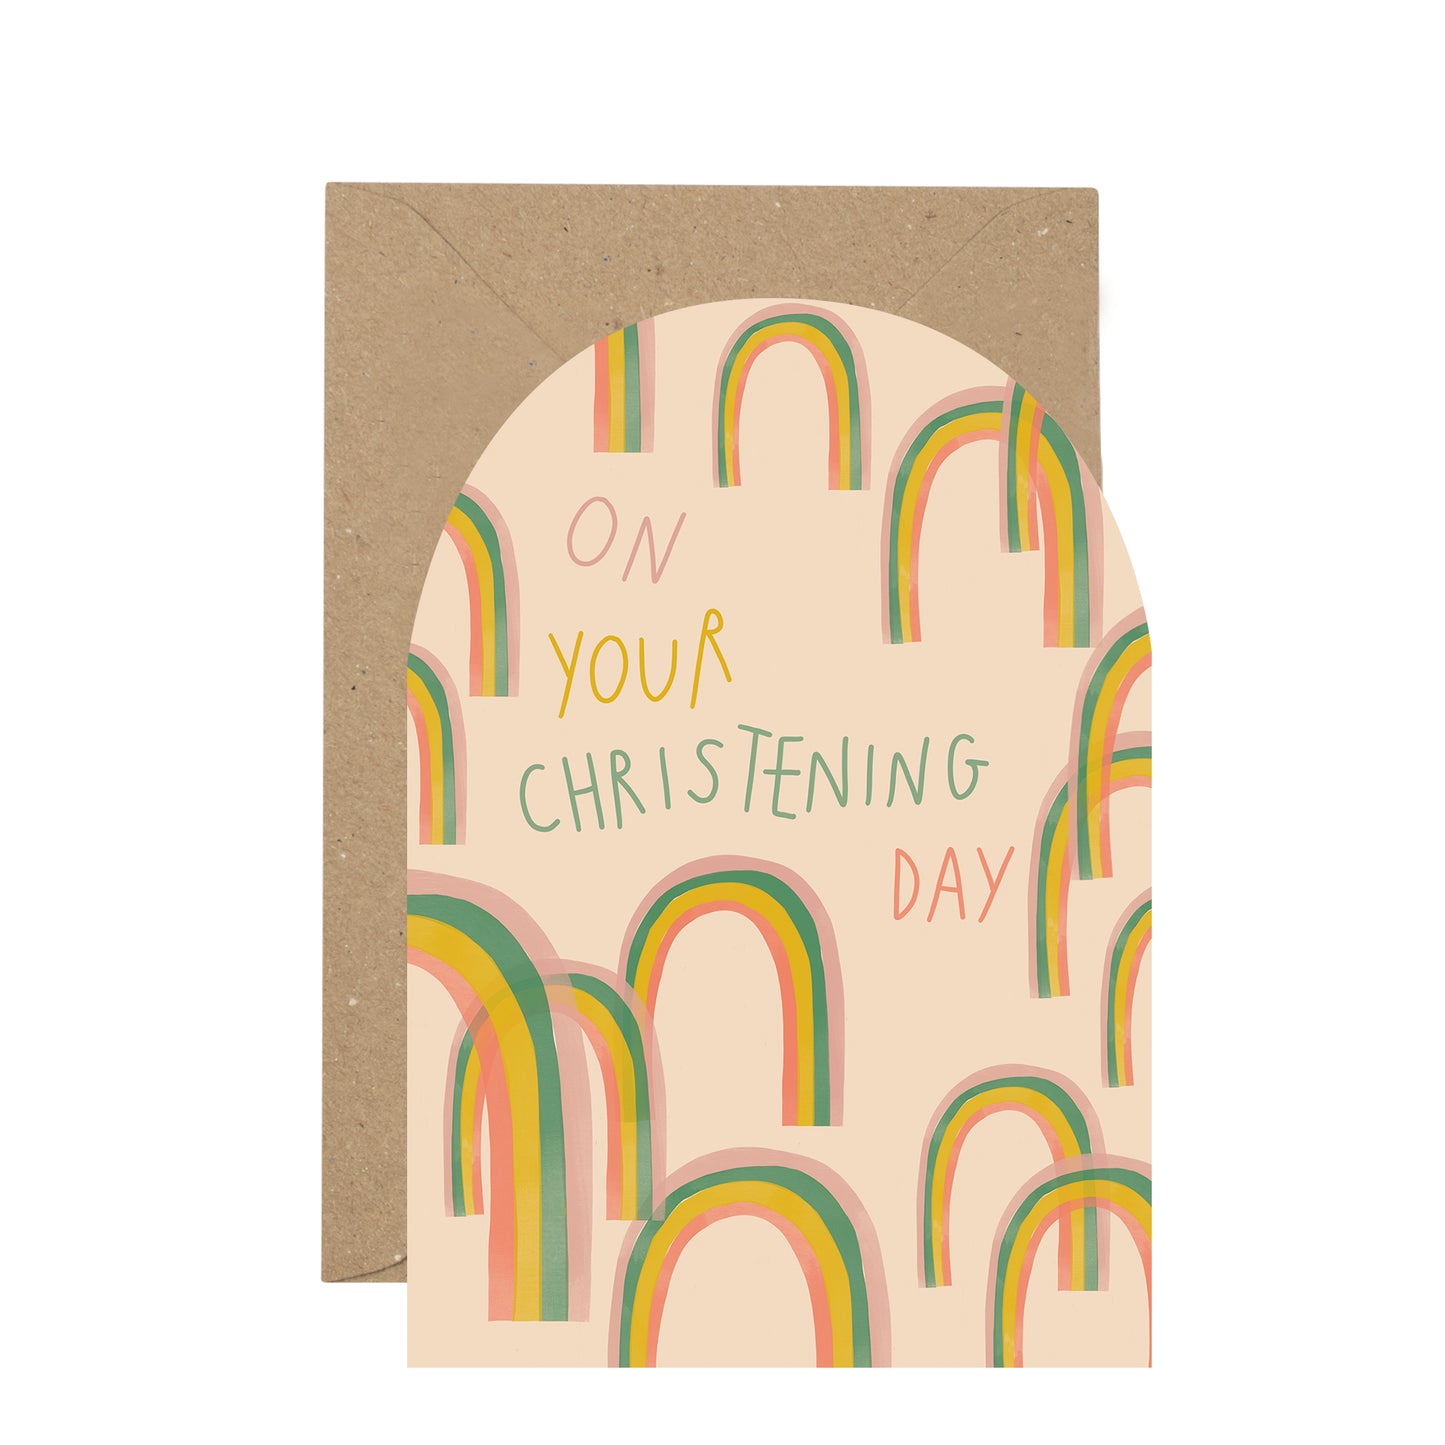 'On Your Christening Day' rainbow card